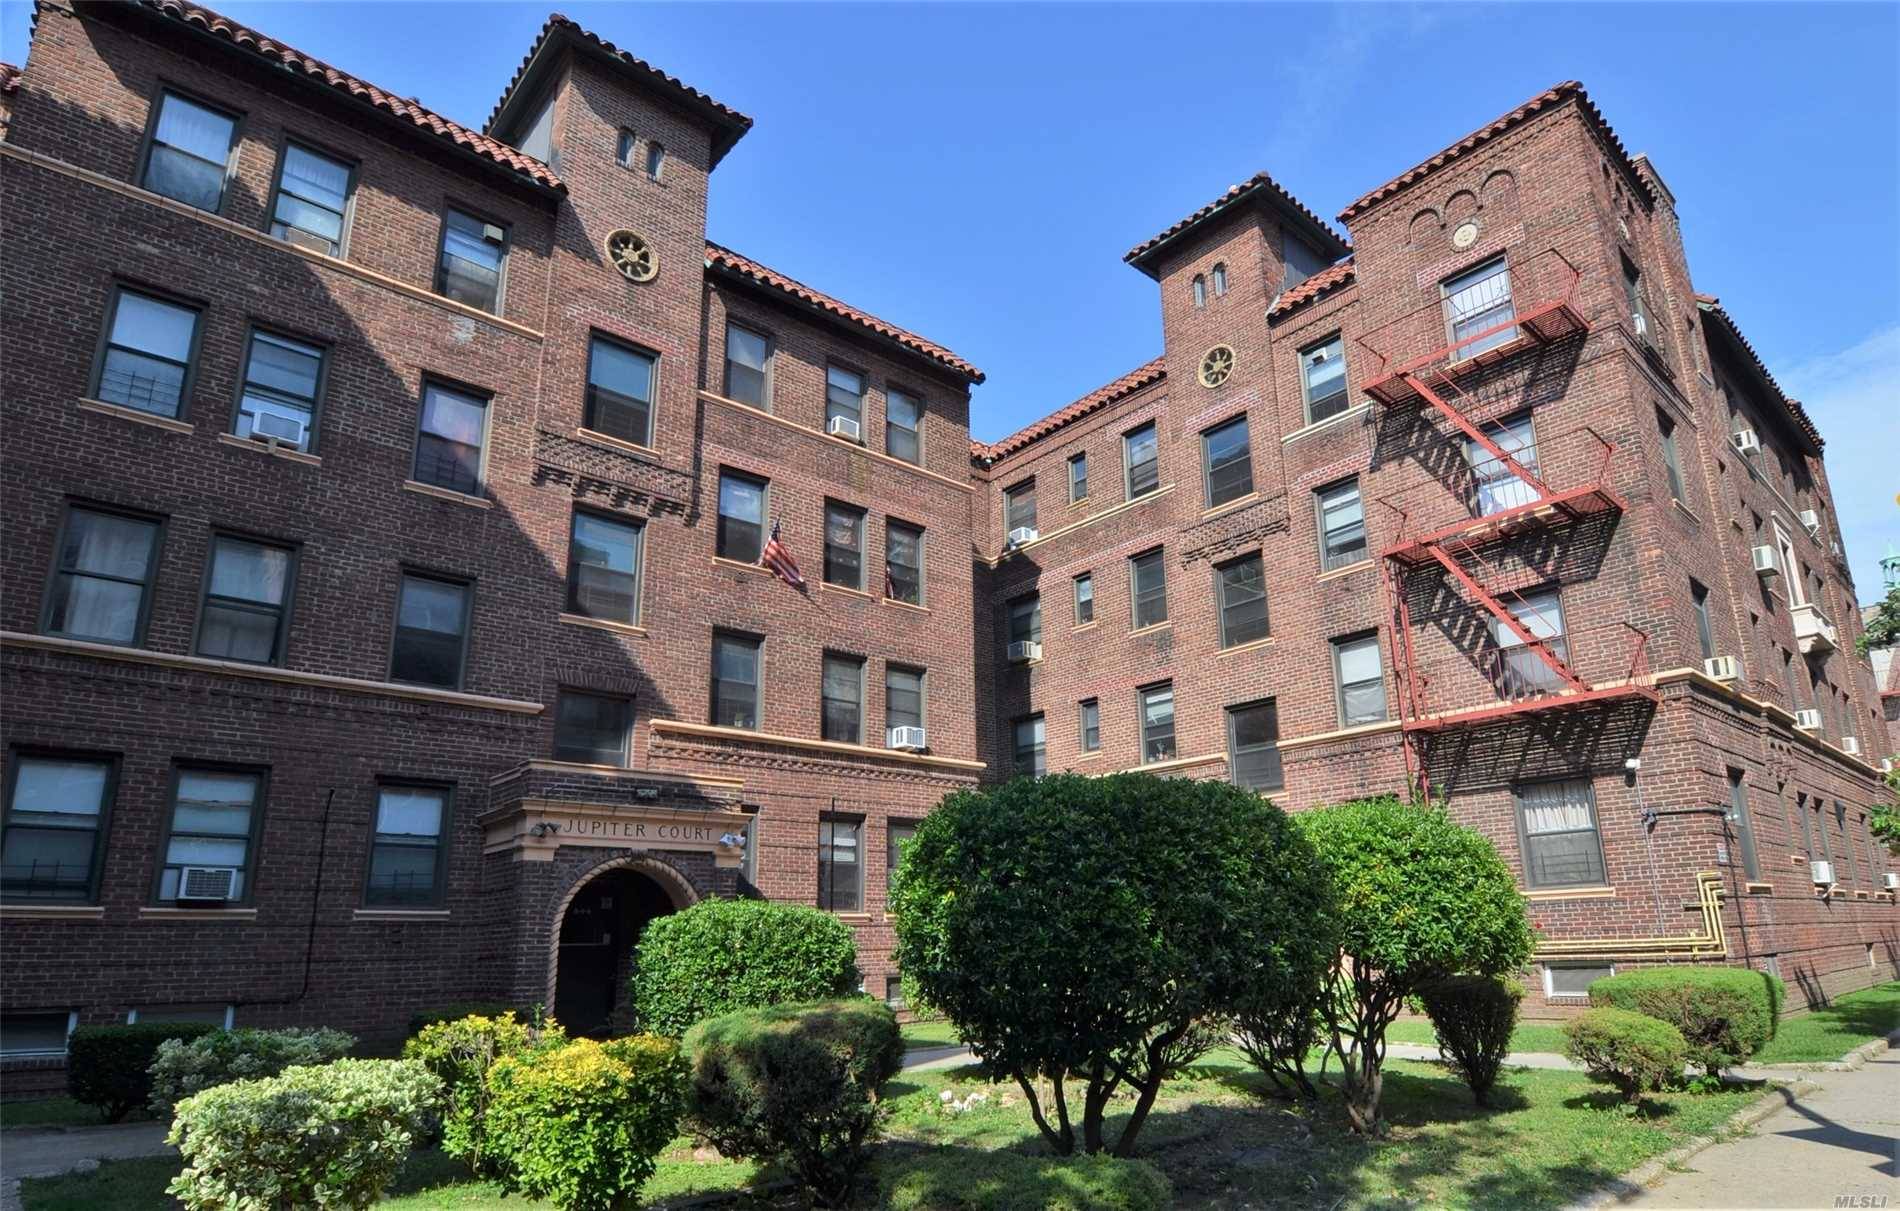 Saunders 2 BR House Forest Hills LIC / Queens